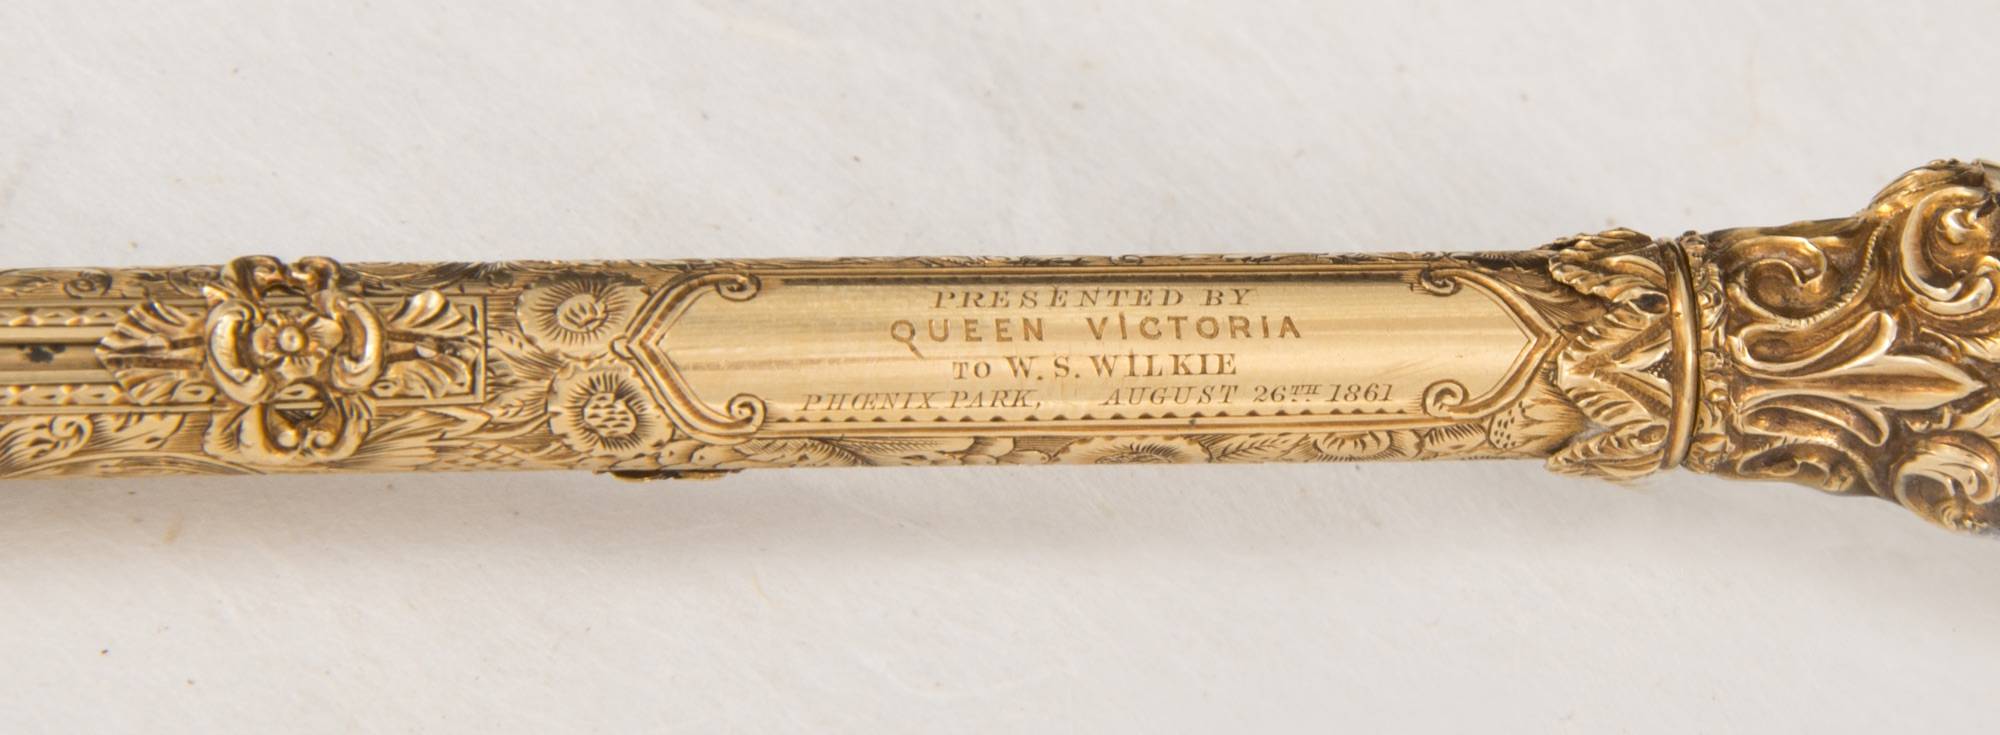 Gold pen presented by Queen Victoria to W.S. Wilkie, bailiff of the Phoenix Park, 1861